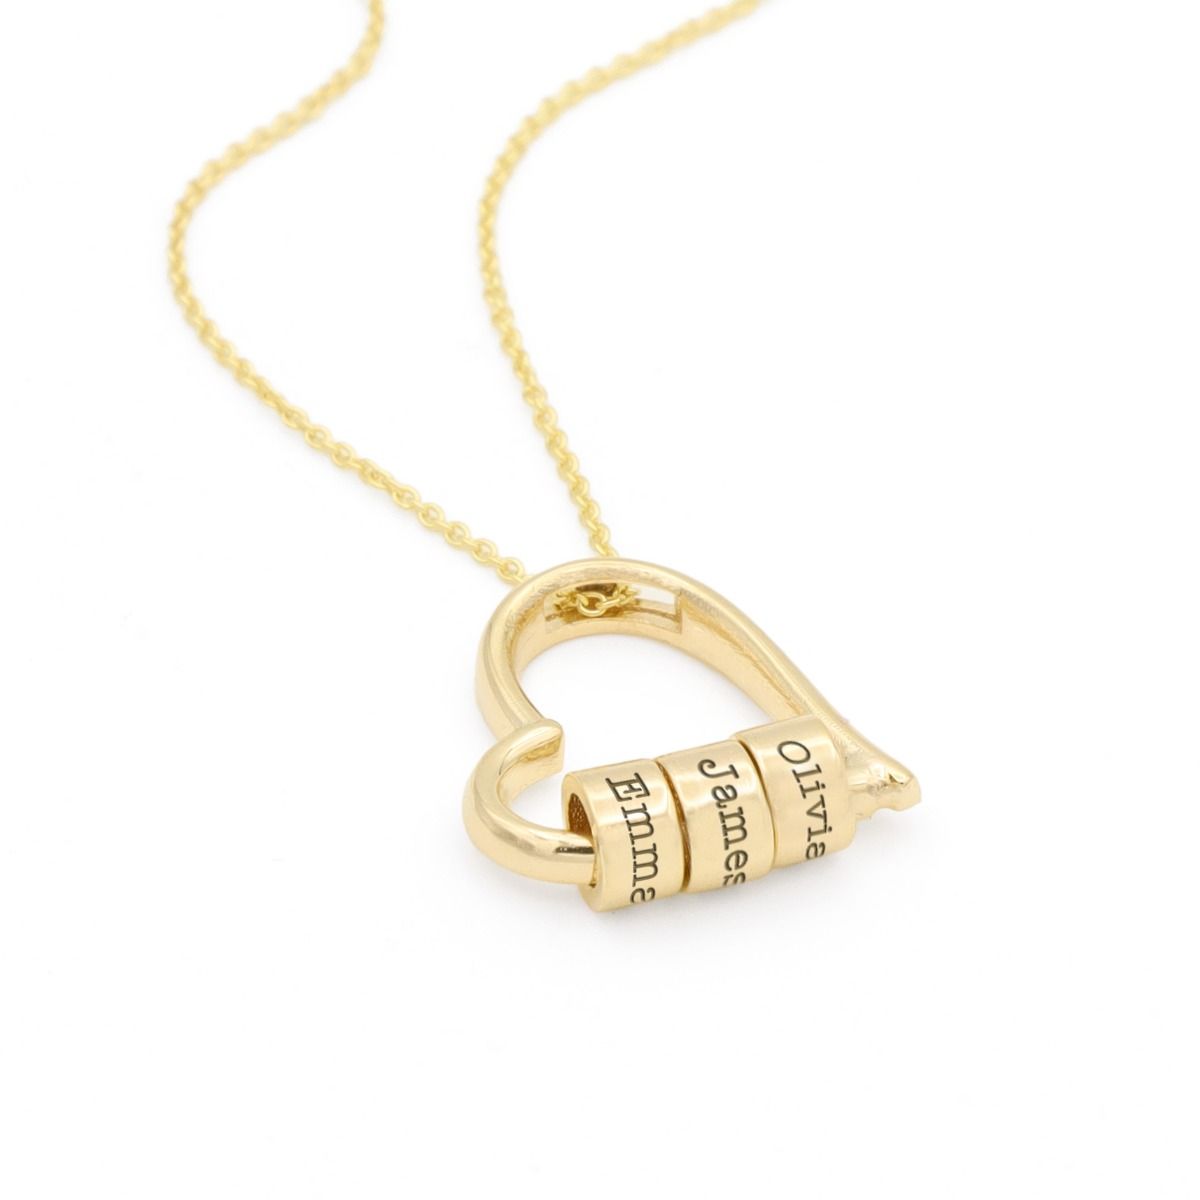 Heart Charm Lock Necklace - Gold Vermeil - Gift for Valentine's Day - Initial Necklace - Heart Charm - Pedlock Necklace